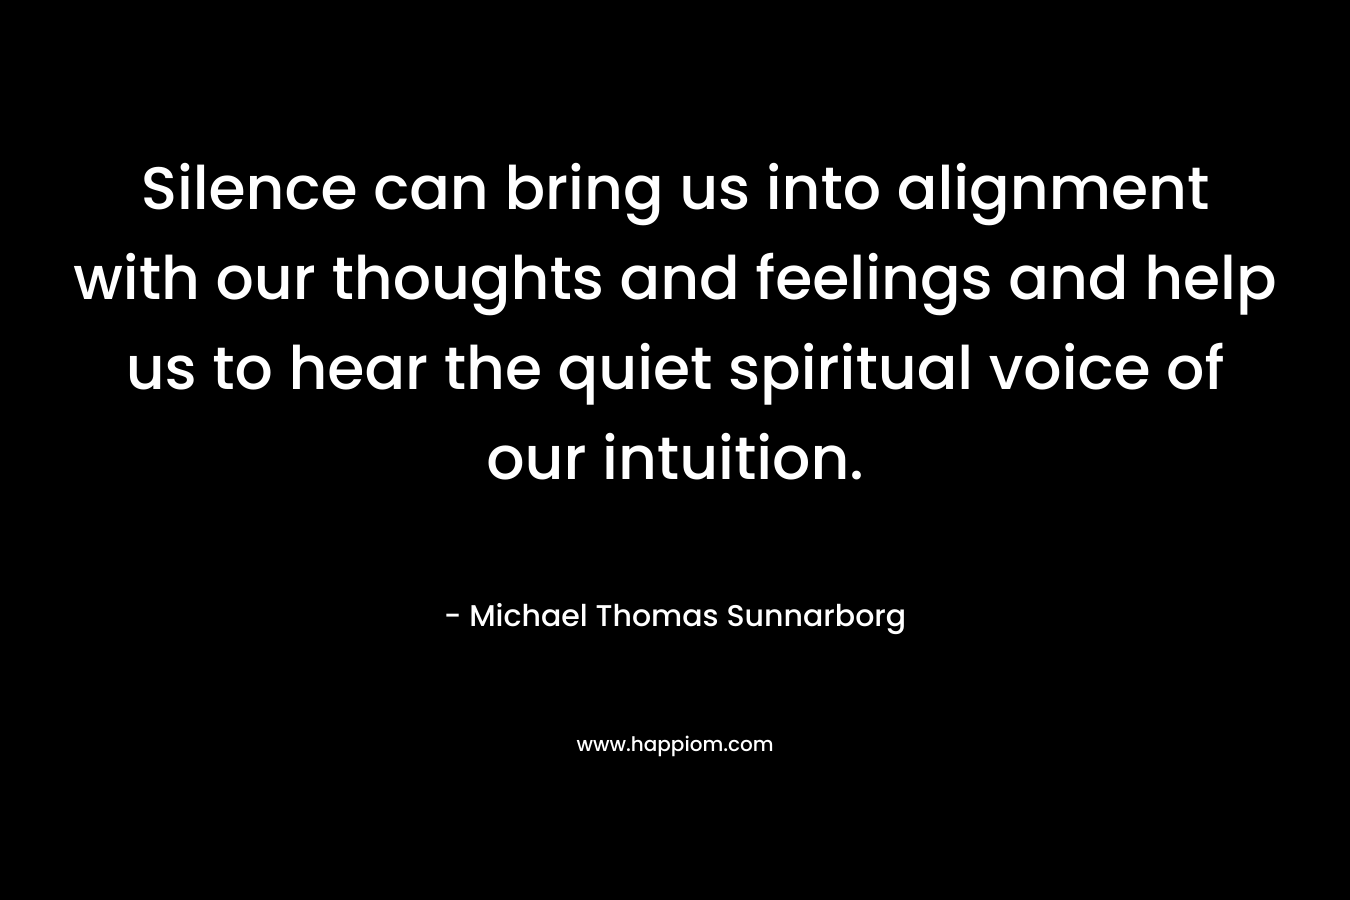 Silence can bring us into alignment with our thoughts and feelings and help us to hear the quiet spiritual voice of our intuition. – Michael Thomas Sunnarborg